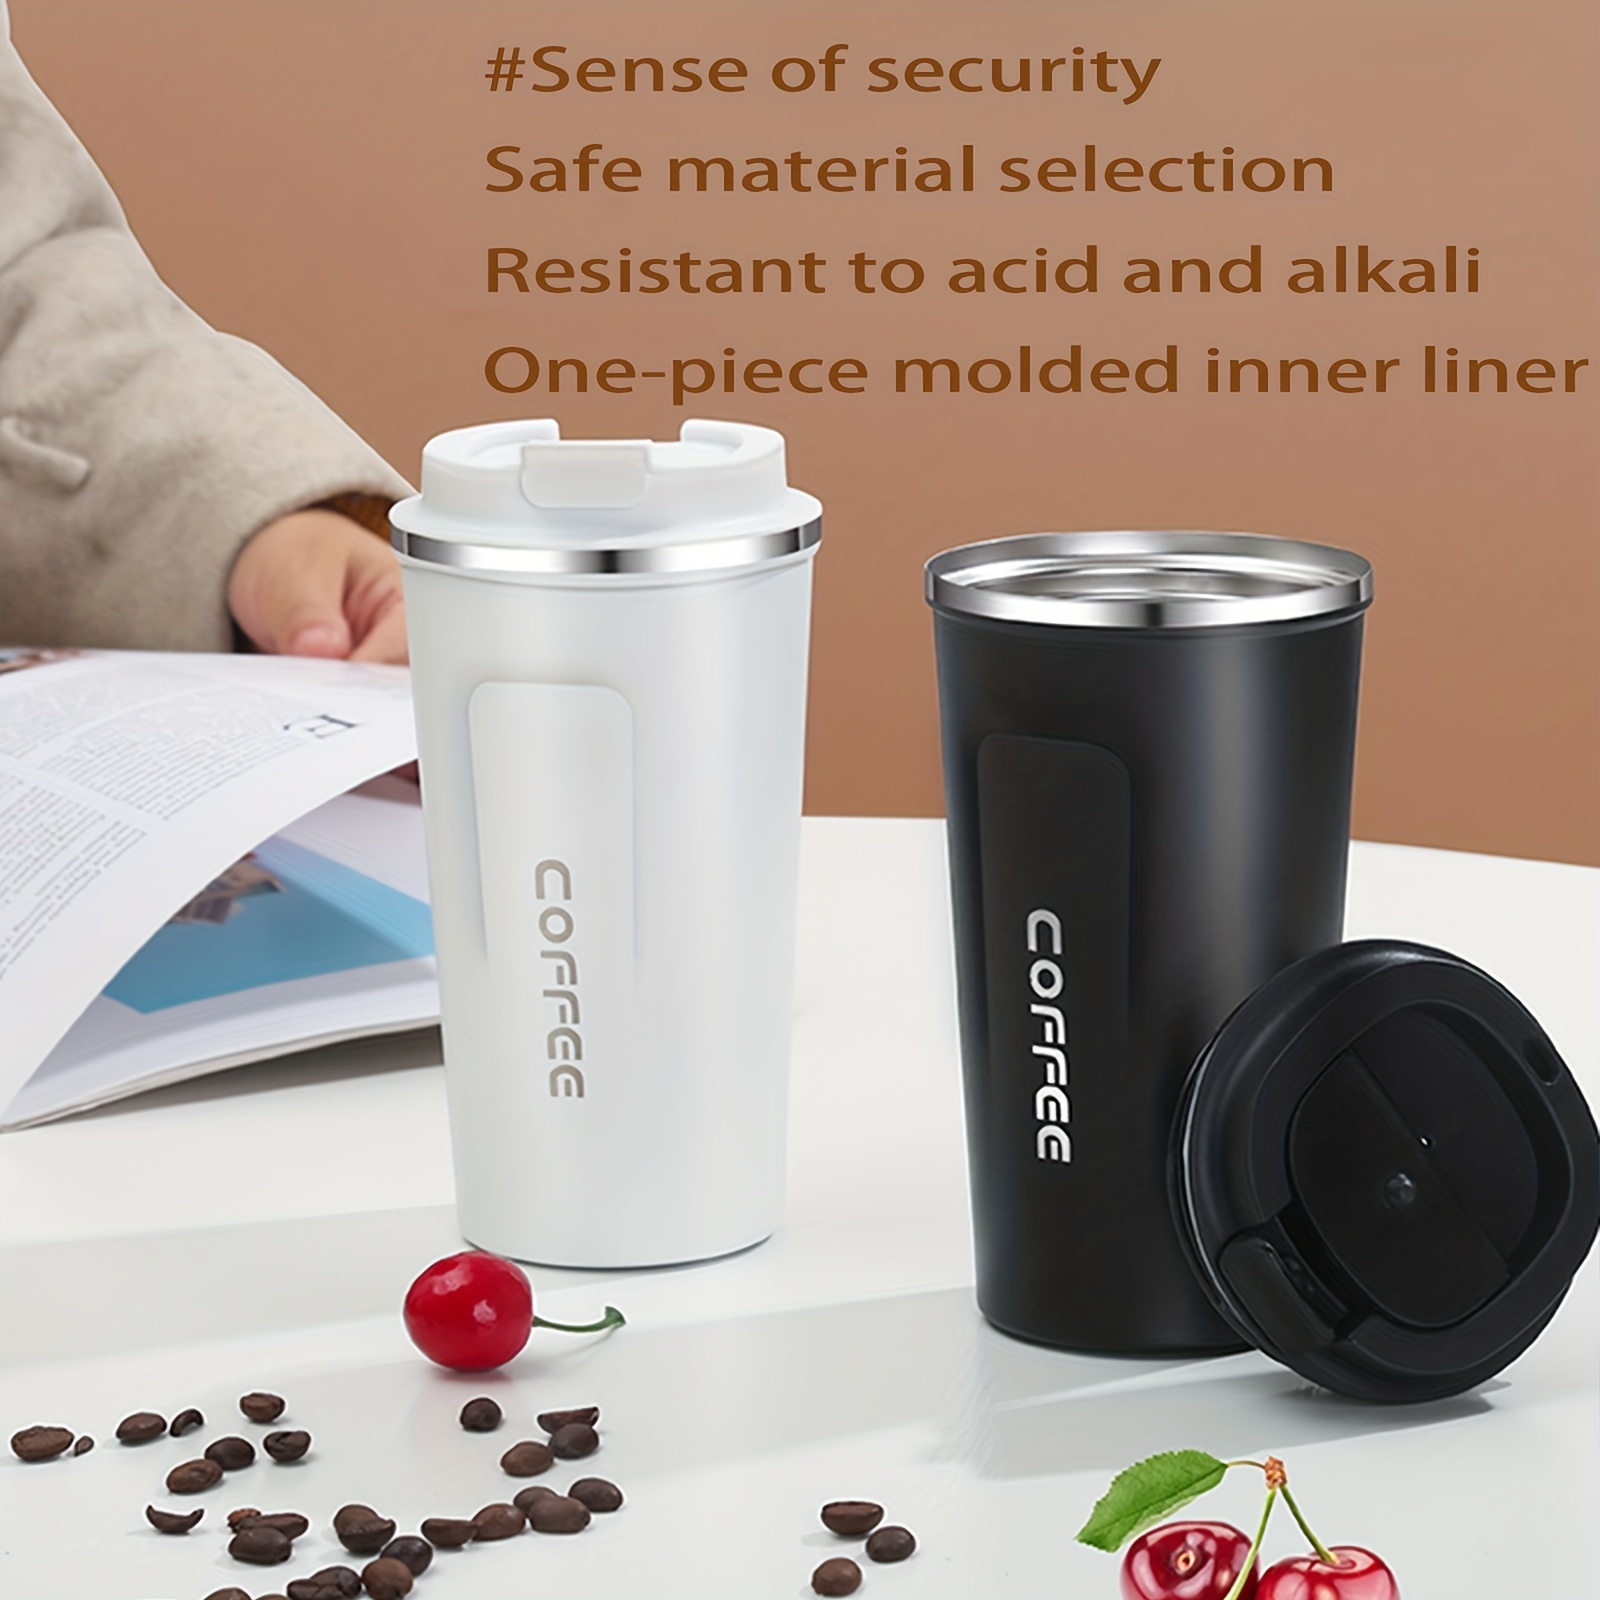 1pc Stainless Steel Insulated Coffee Cup With Lid, Portable Small Travel Mug,  Outdoor Thermos Cup With Unique Design, Insulated Tea Cup